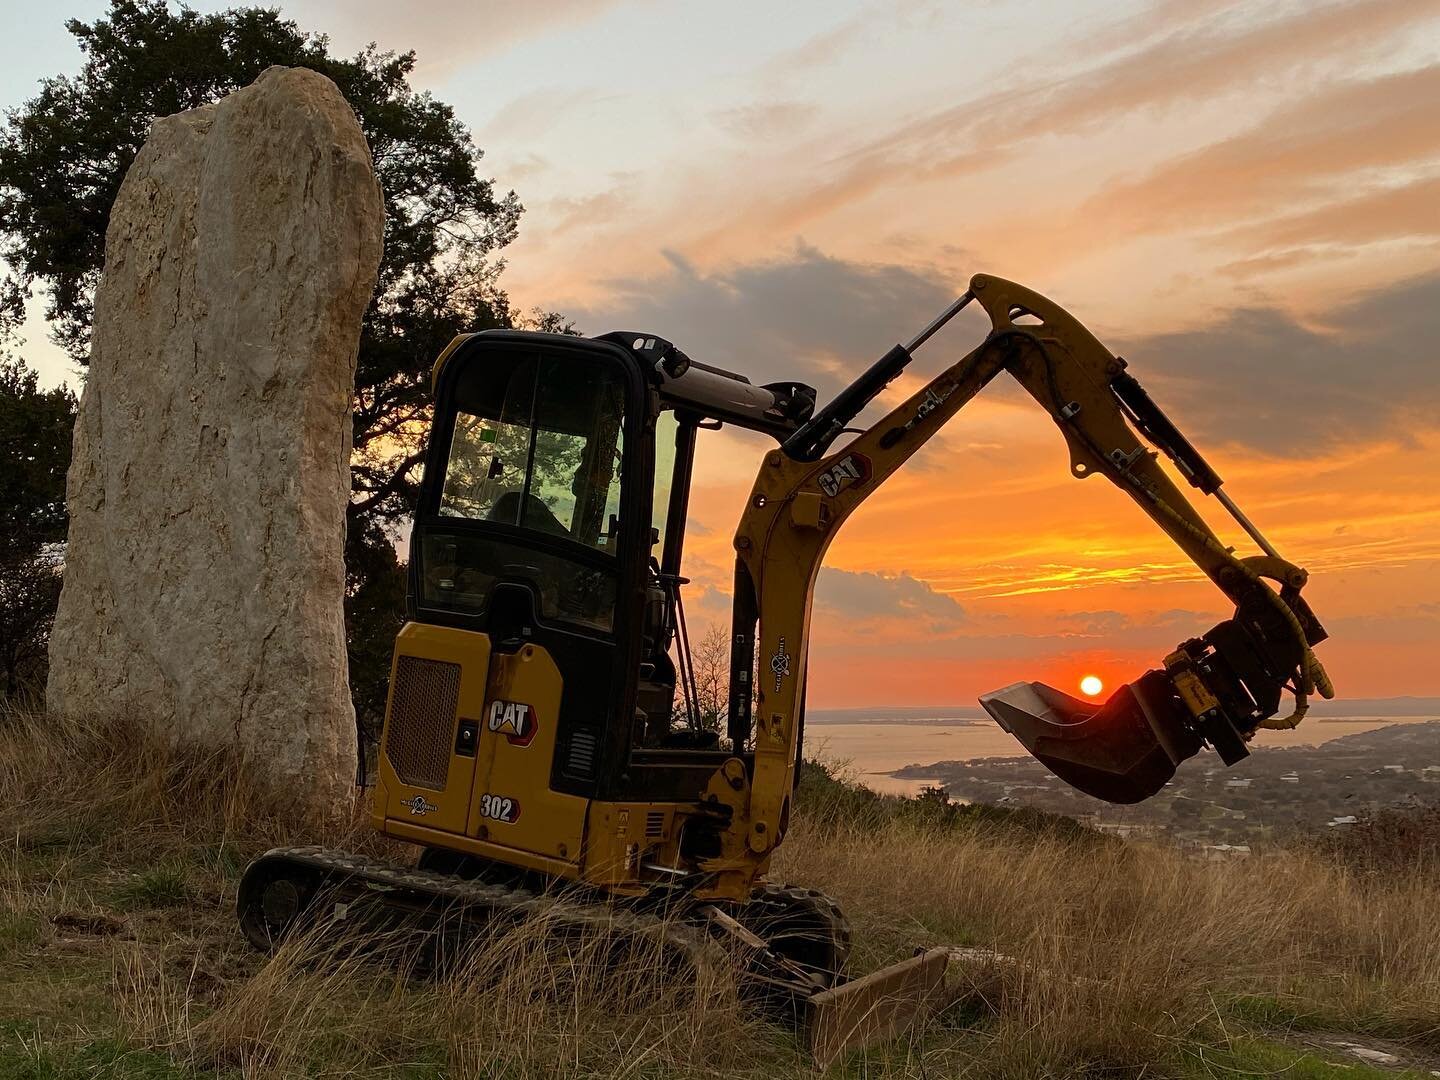 A great way to close our build in Texas!!

@spidermountaintx 

@catconstruction @engcon_na 
#texas #spidermountainbikepark #bikepark #sunset #engcon #tiltrotator #trailbuilder #neverstopneverstopping #sorryforpartying